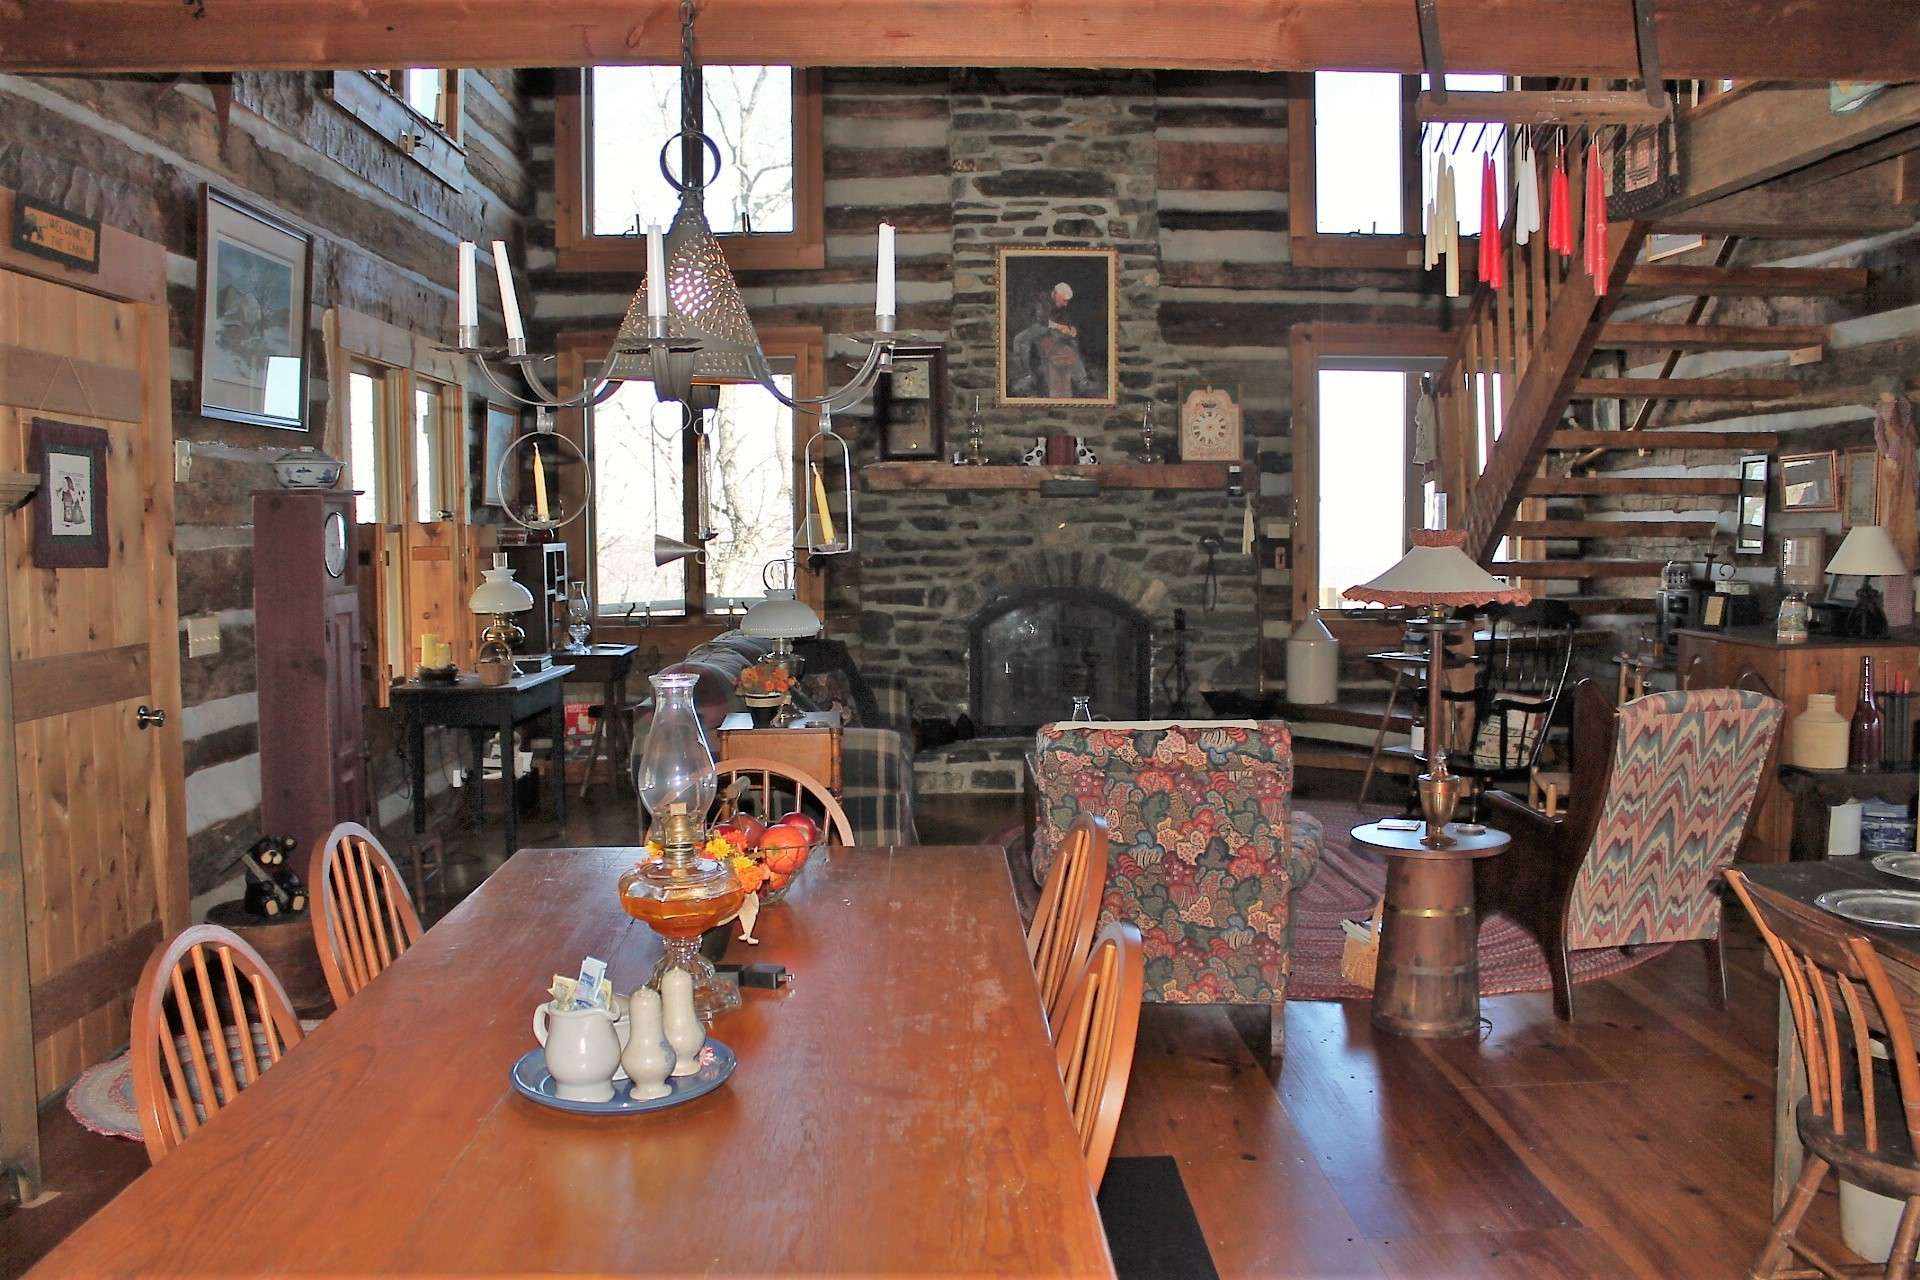 The great room keeps the living, kitchen and dining areas open to each other.  It won't be hard to get the family together for meals when you come to the cabin.